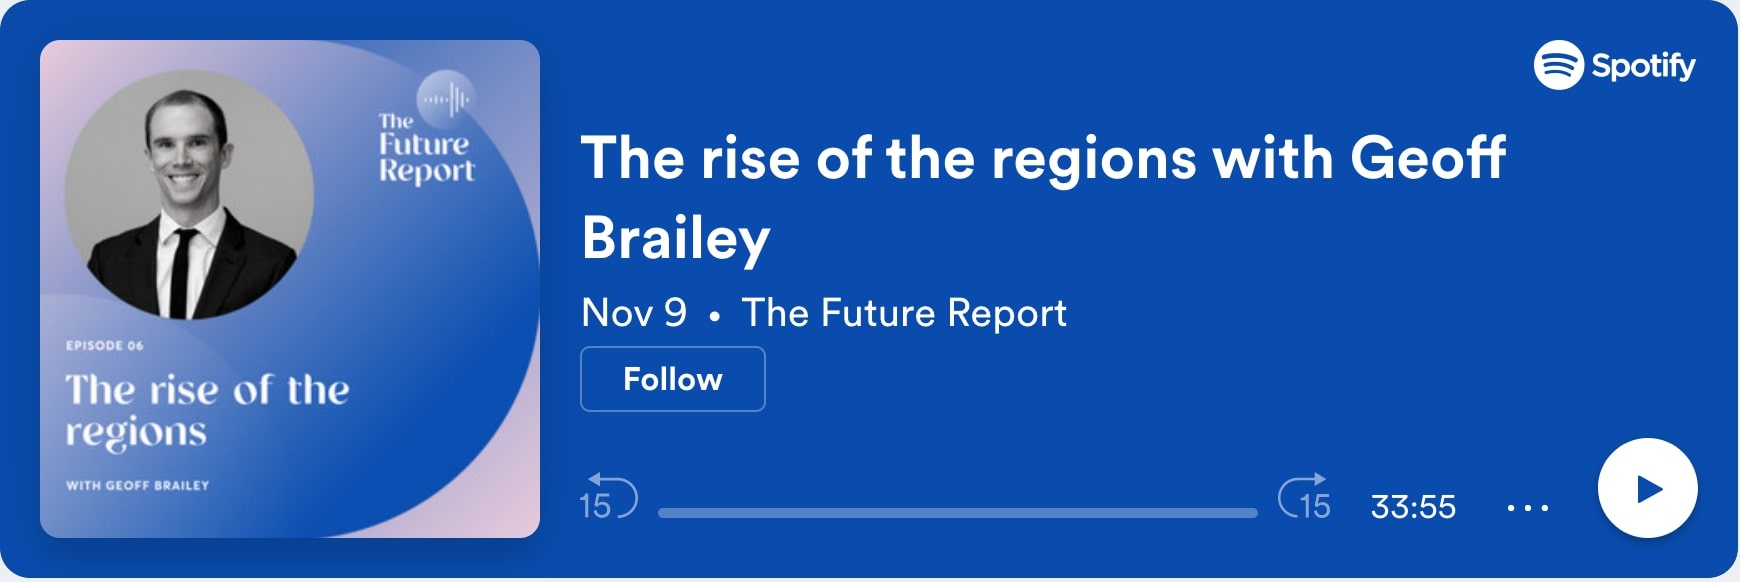 the future report podcast. The episode is "the rise of the regions with geoff brailey"